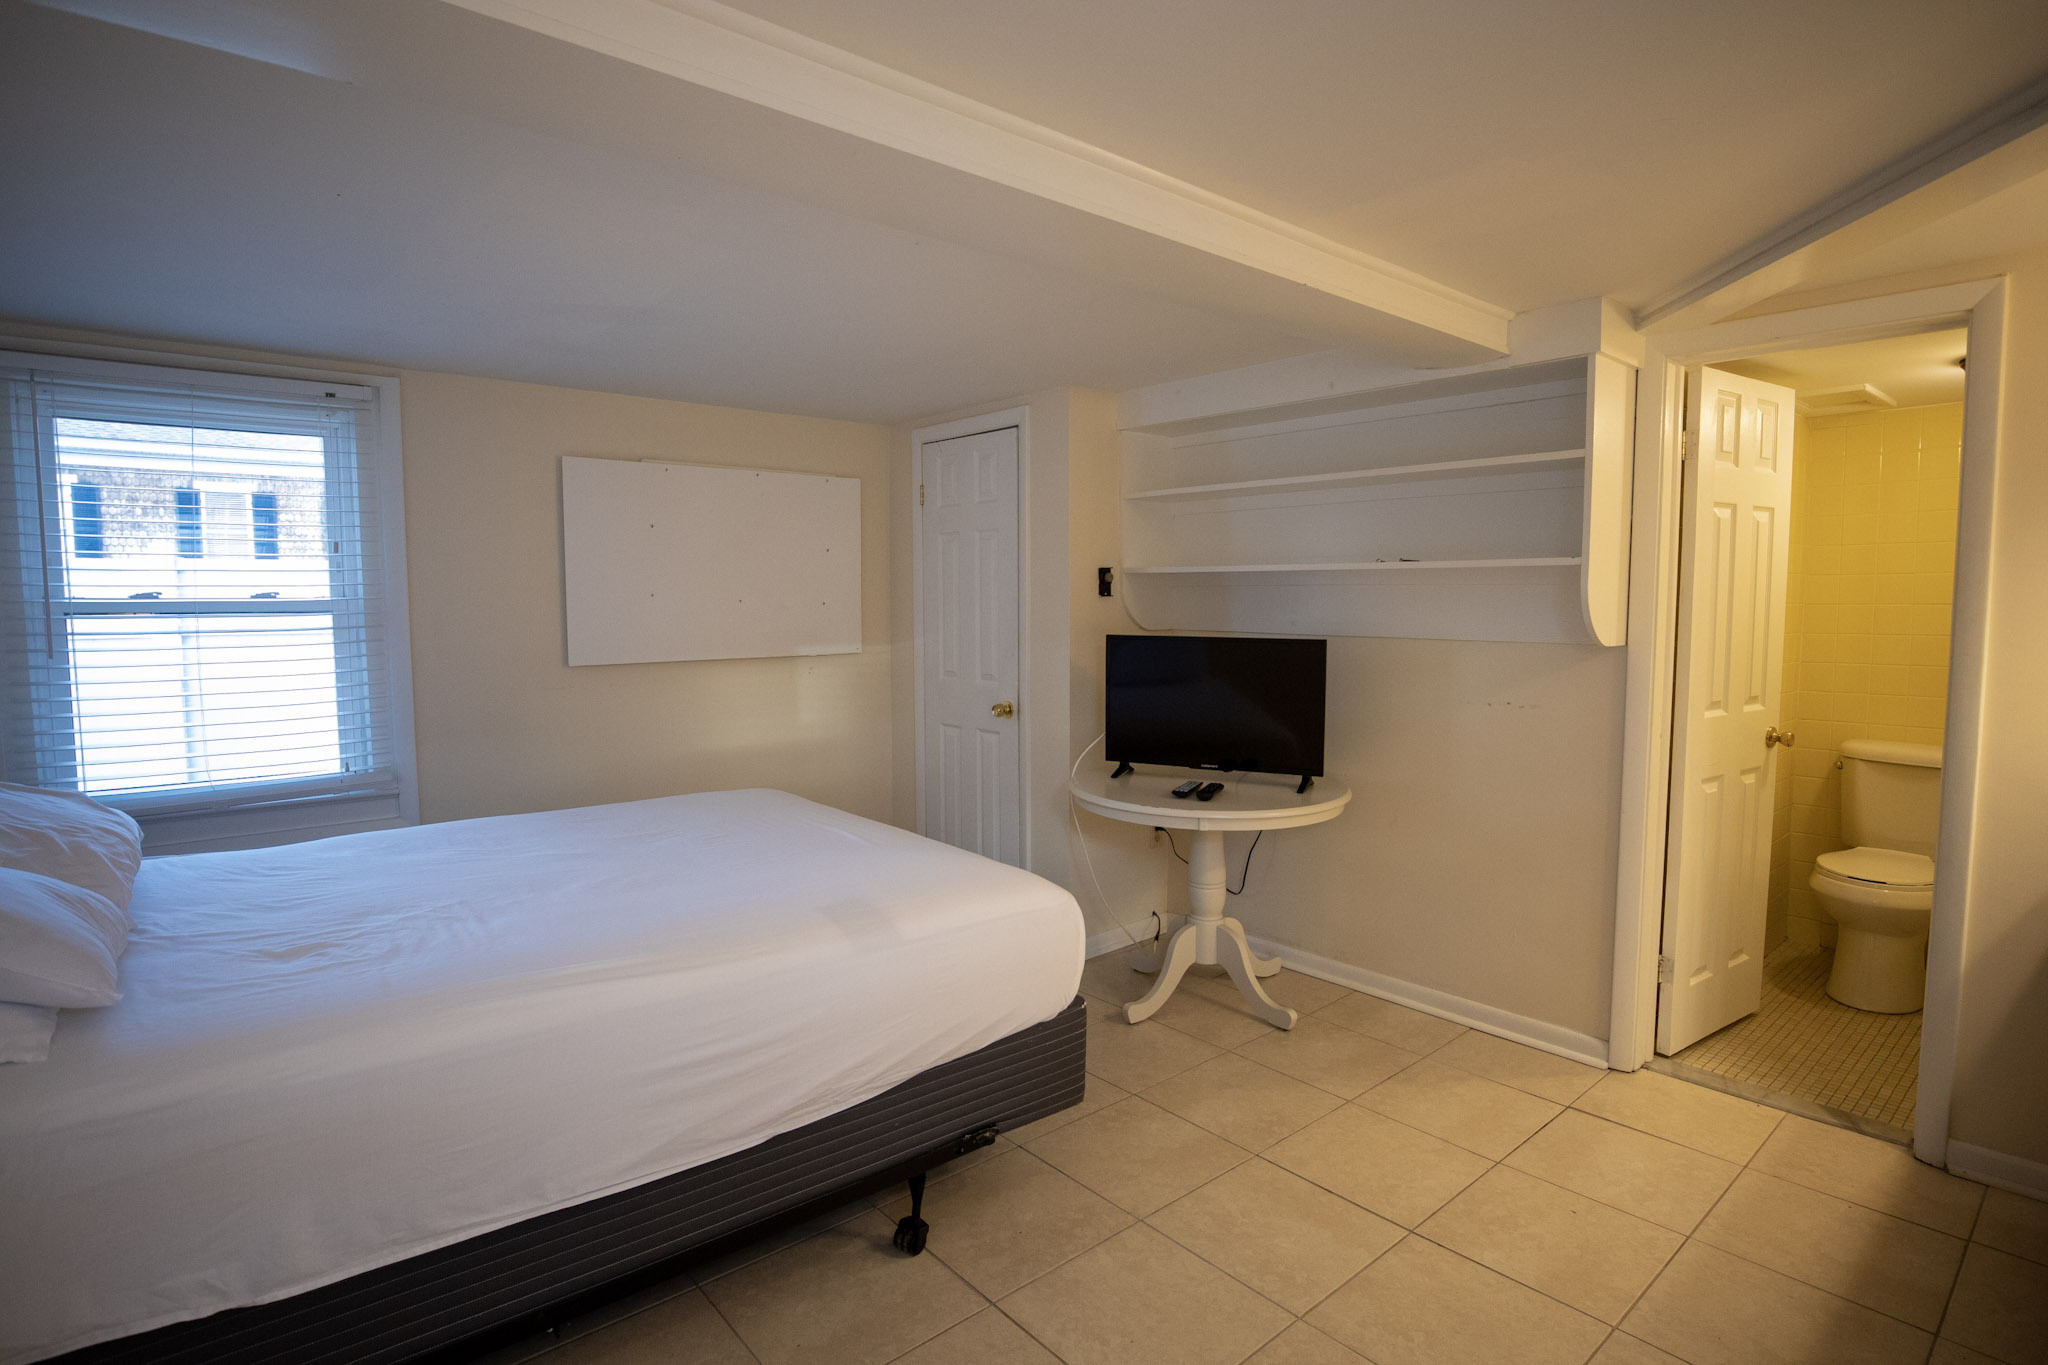 Studio apartment with full size bed and television at the Majestic Hotel in Ocean City, Maryland